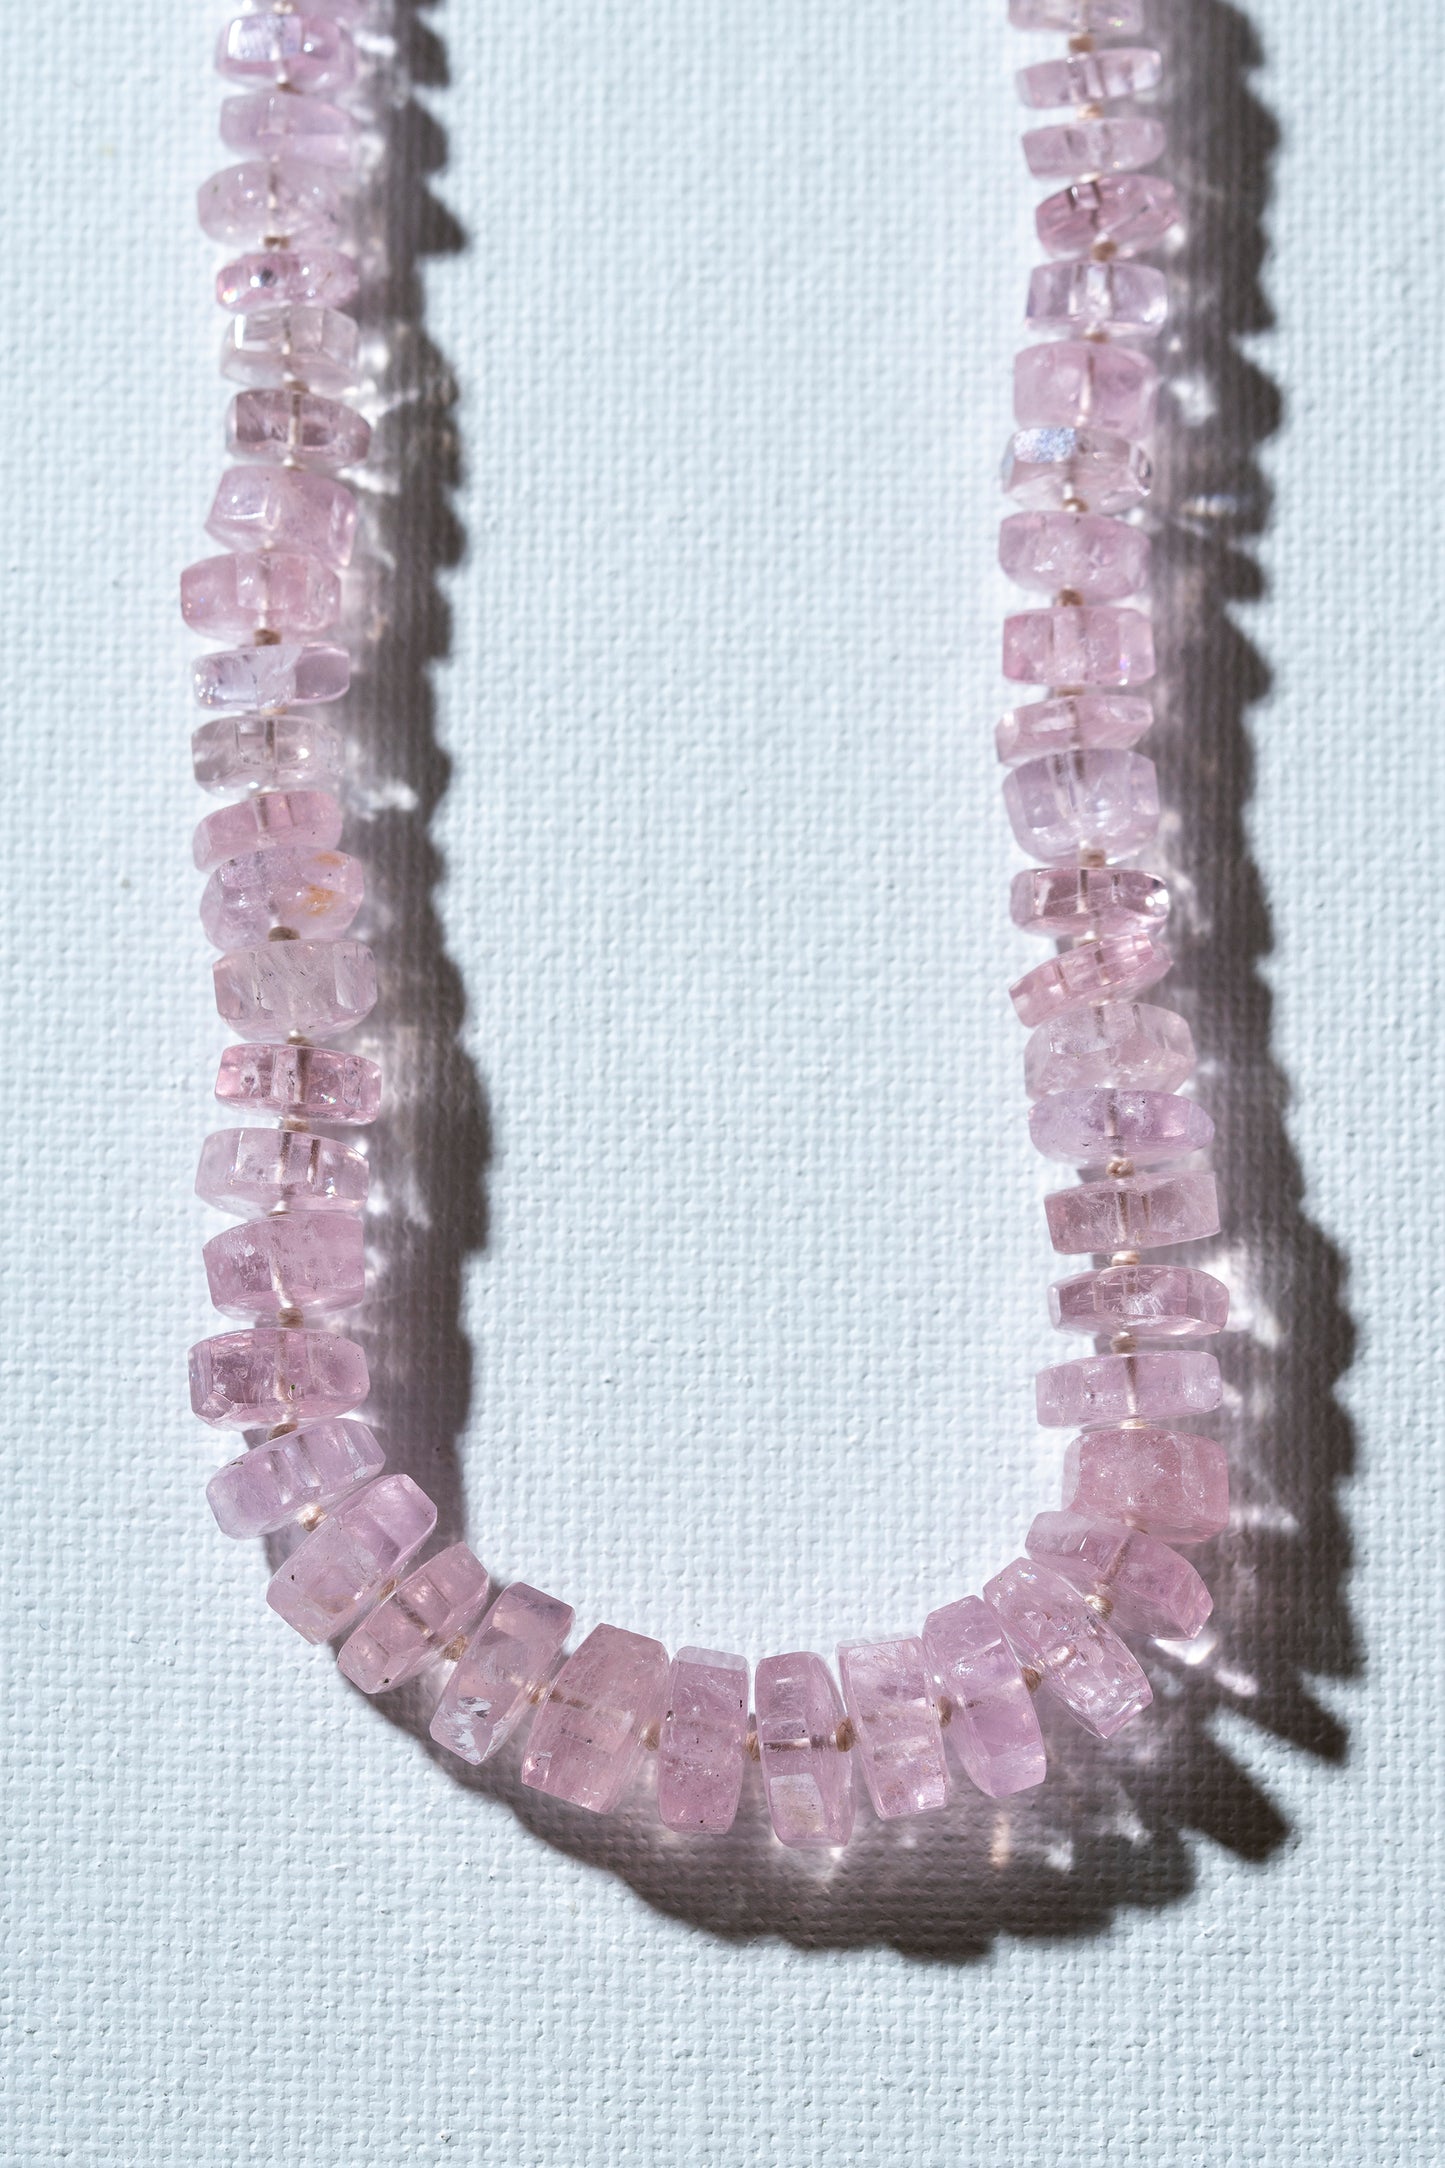 morganite beryl crystal cut knotted bead necklaces beaded jewelry 14k solid gold brittany myra